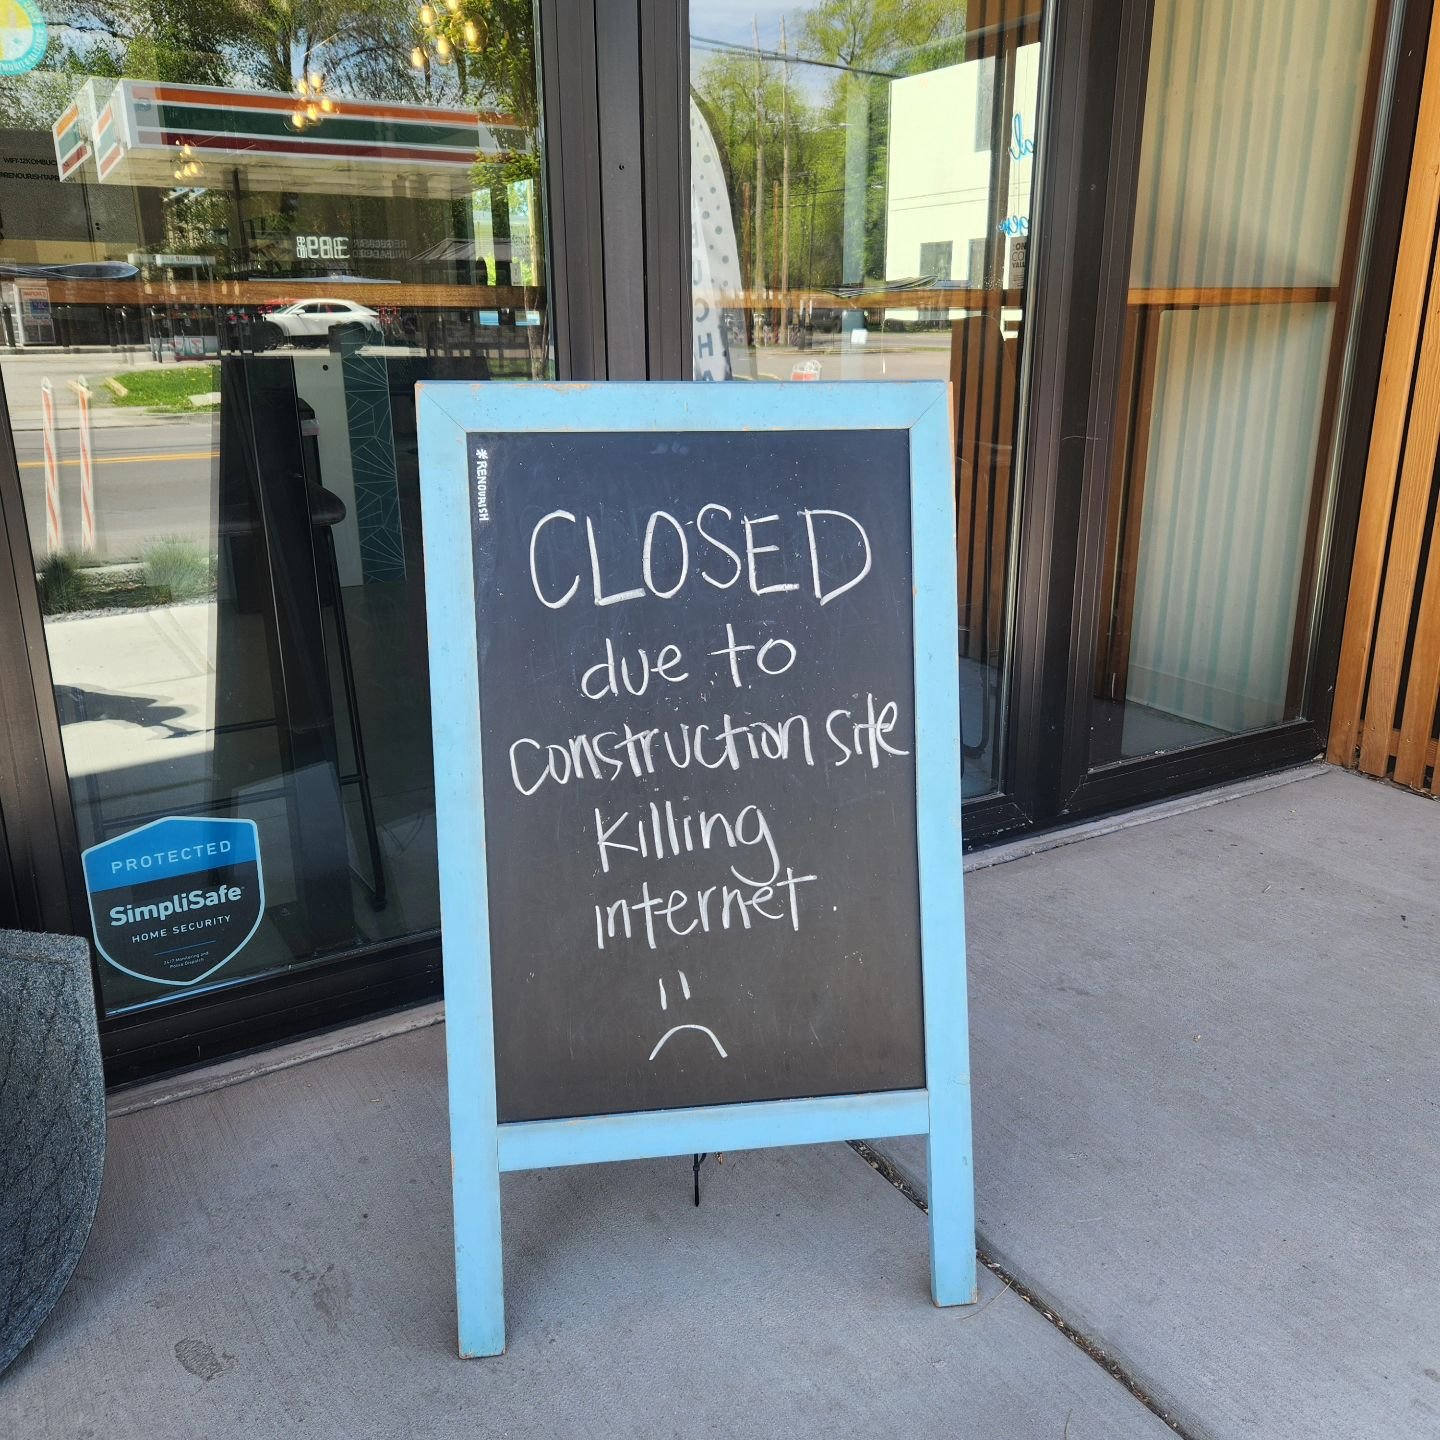 😢 we'll be closed for a few hours since the construction site next door cut internet to our building. Expected to be back up 5ish. 🤞

#saltlakecity